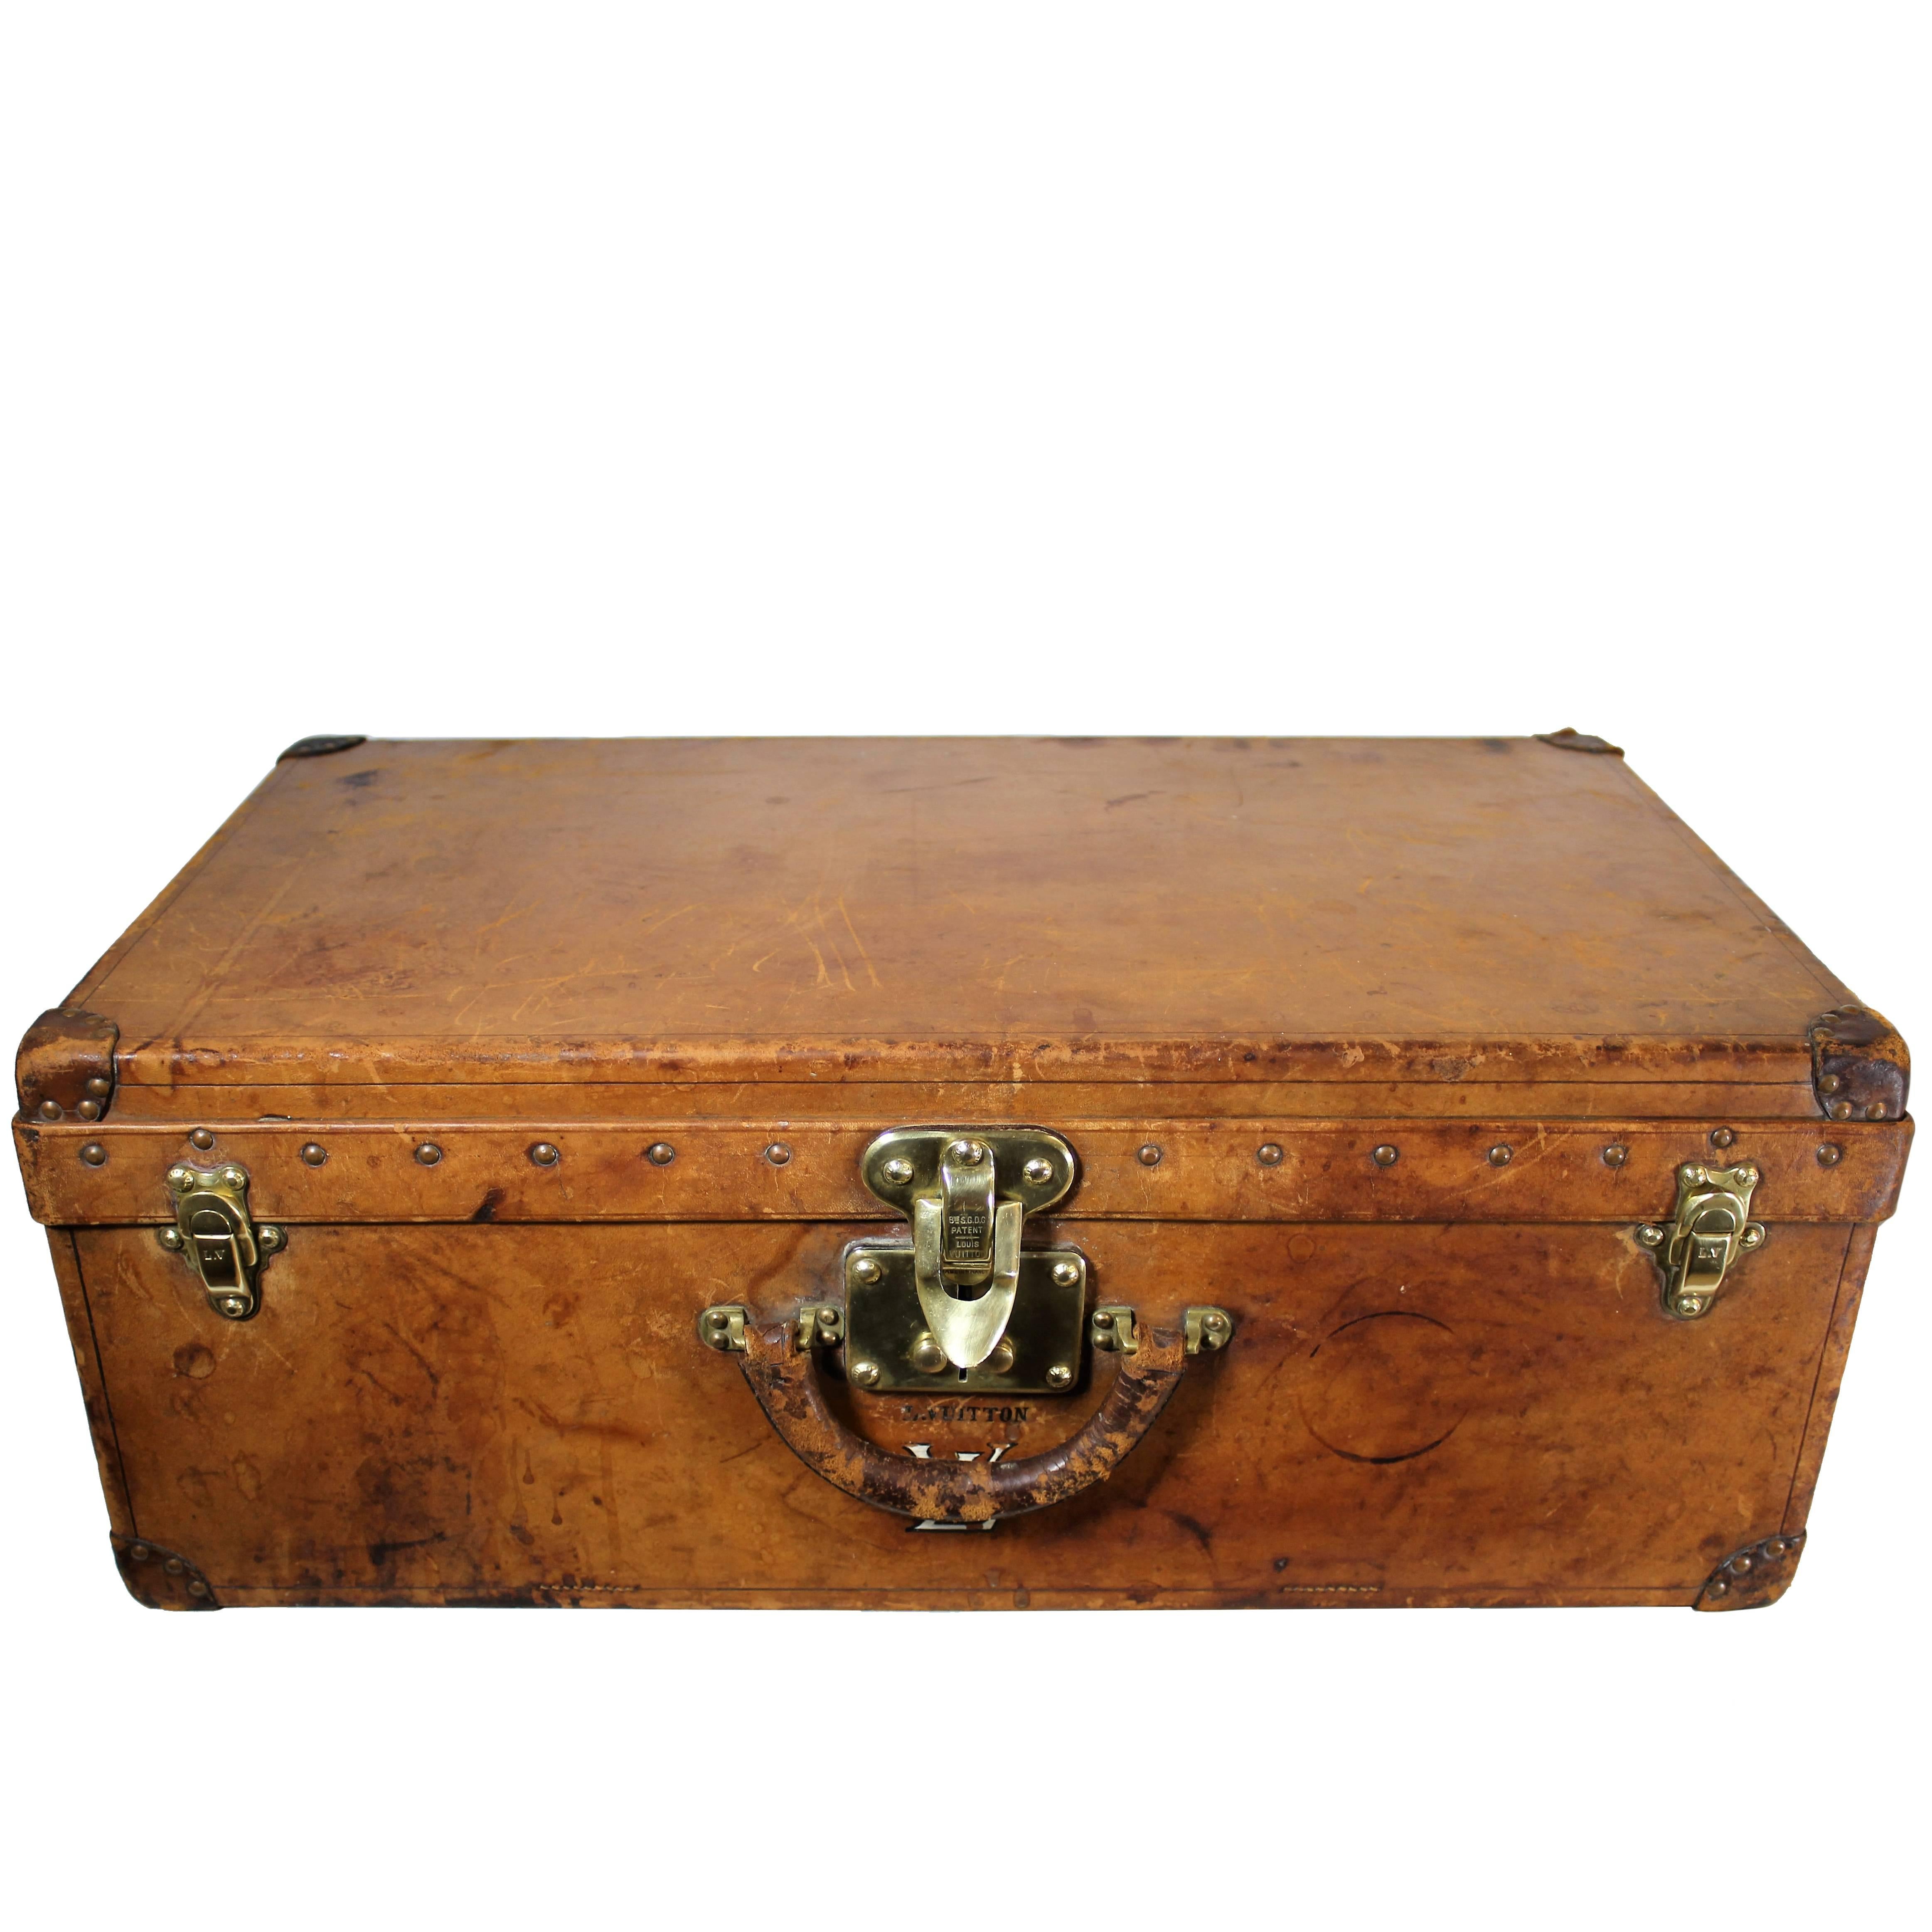 LOUIS VUITTON TRUNK MAKERVERY RARE AUG 5, 1890 SIGNED